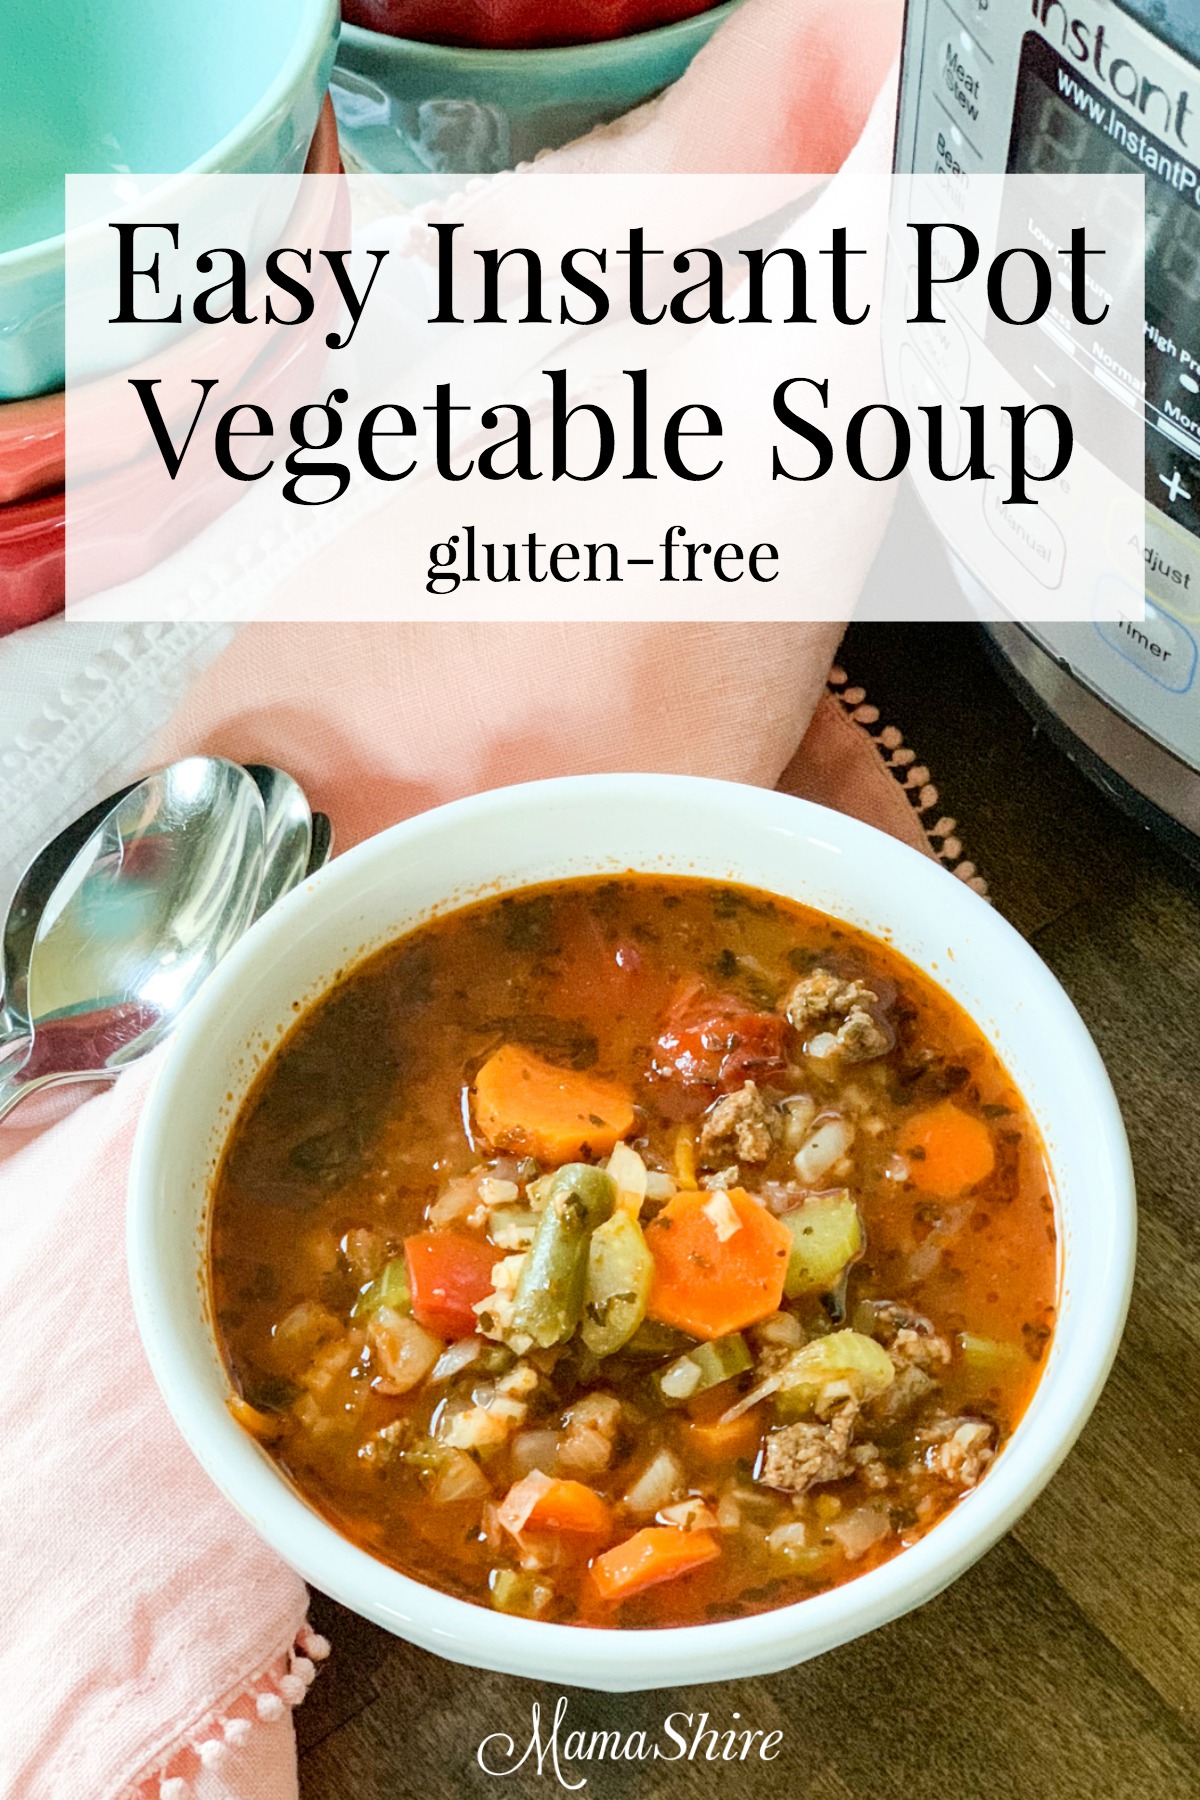 Easy Instant Pot Vegetable Soup served in a soup bowl.